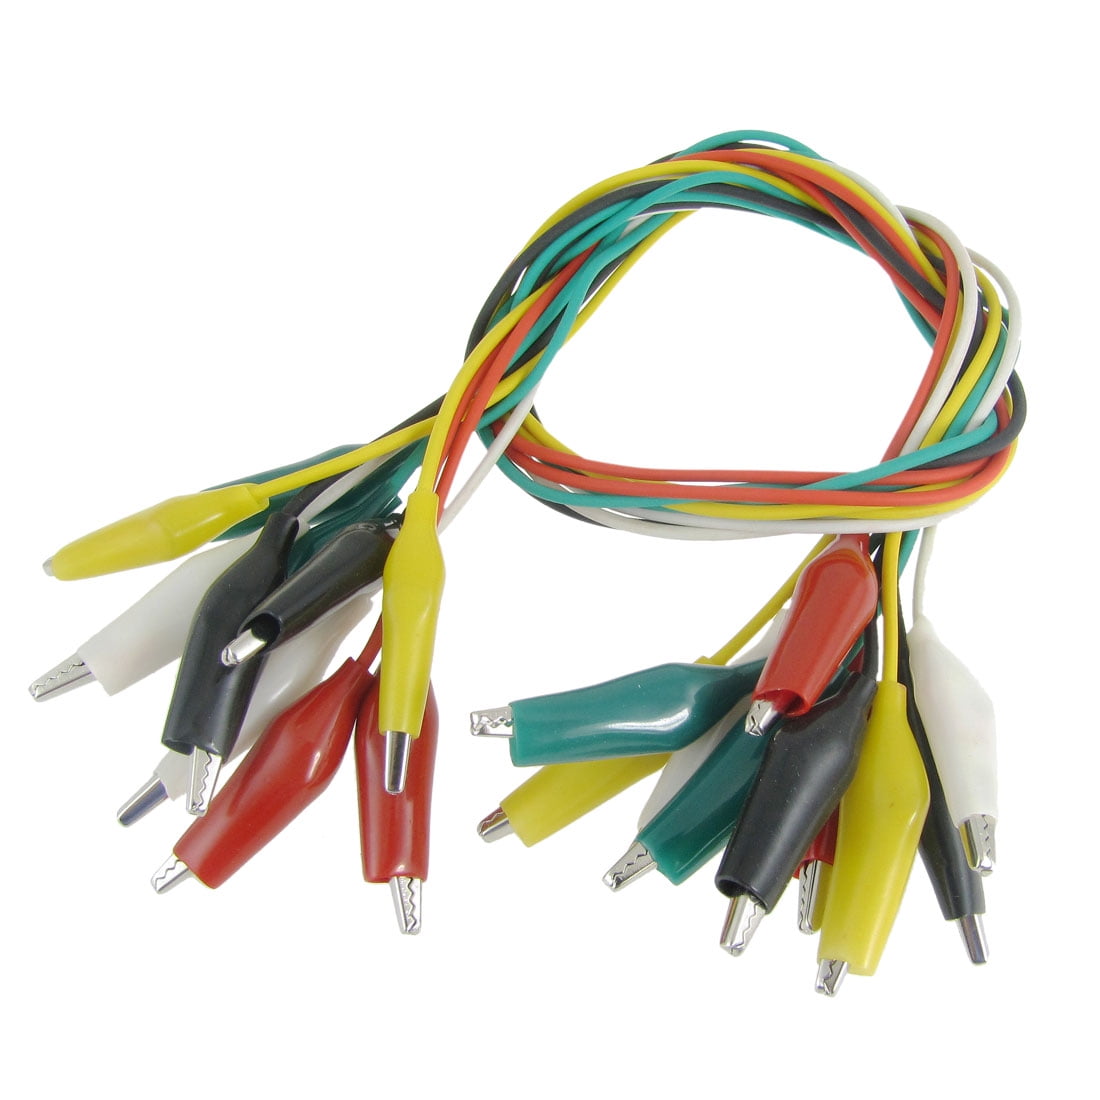 Alligator Clips Cable Insulated Fitting Crocodile For Electrical Jumper 